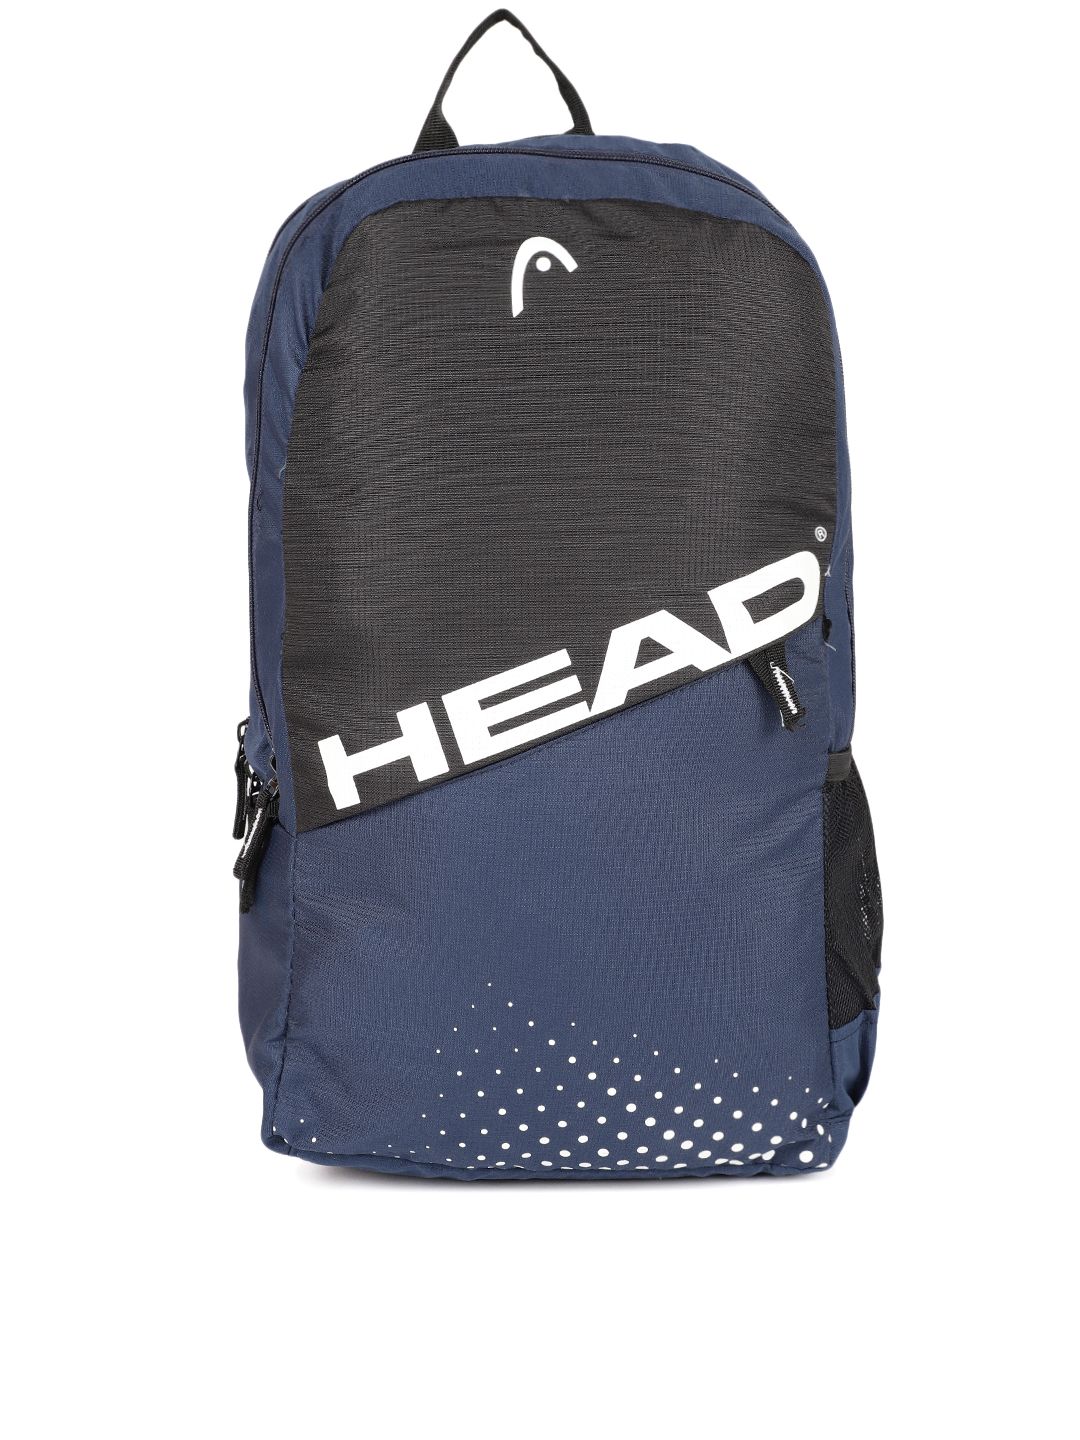 Head Unisex Navy Blue & Black Colourblocked Brand Print Spin Backpack Price in India